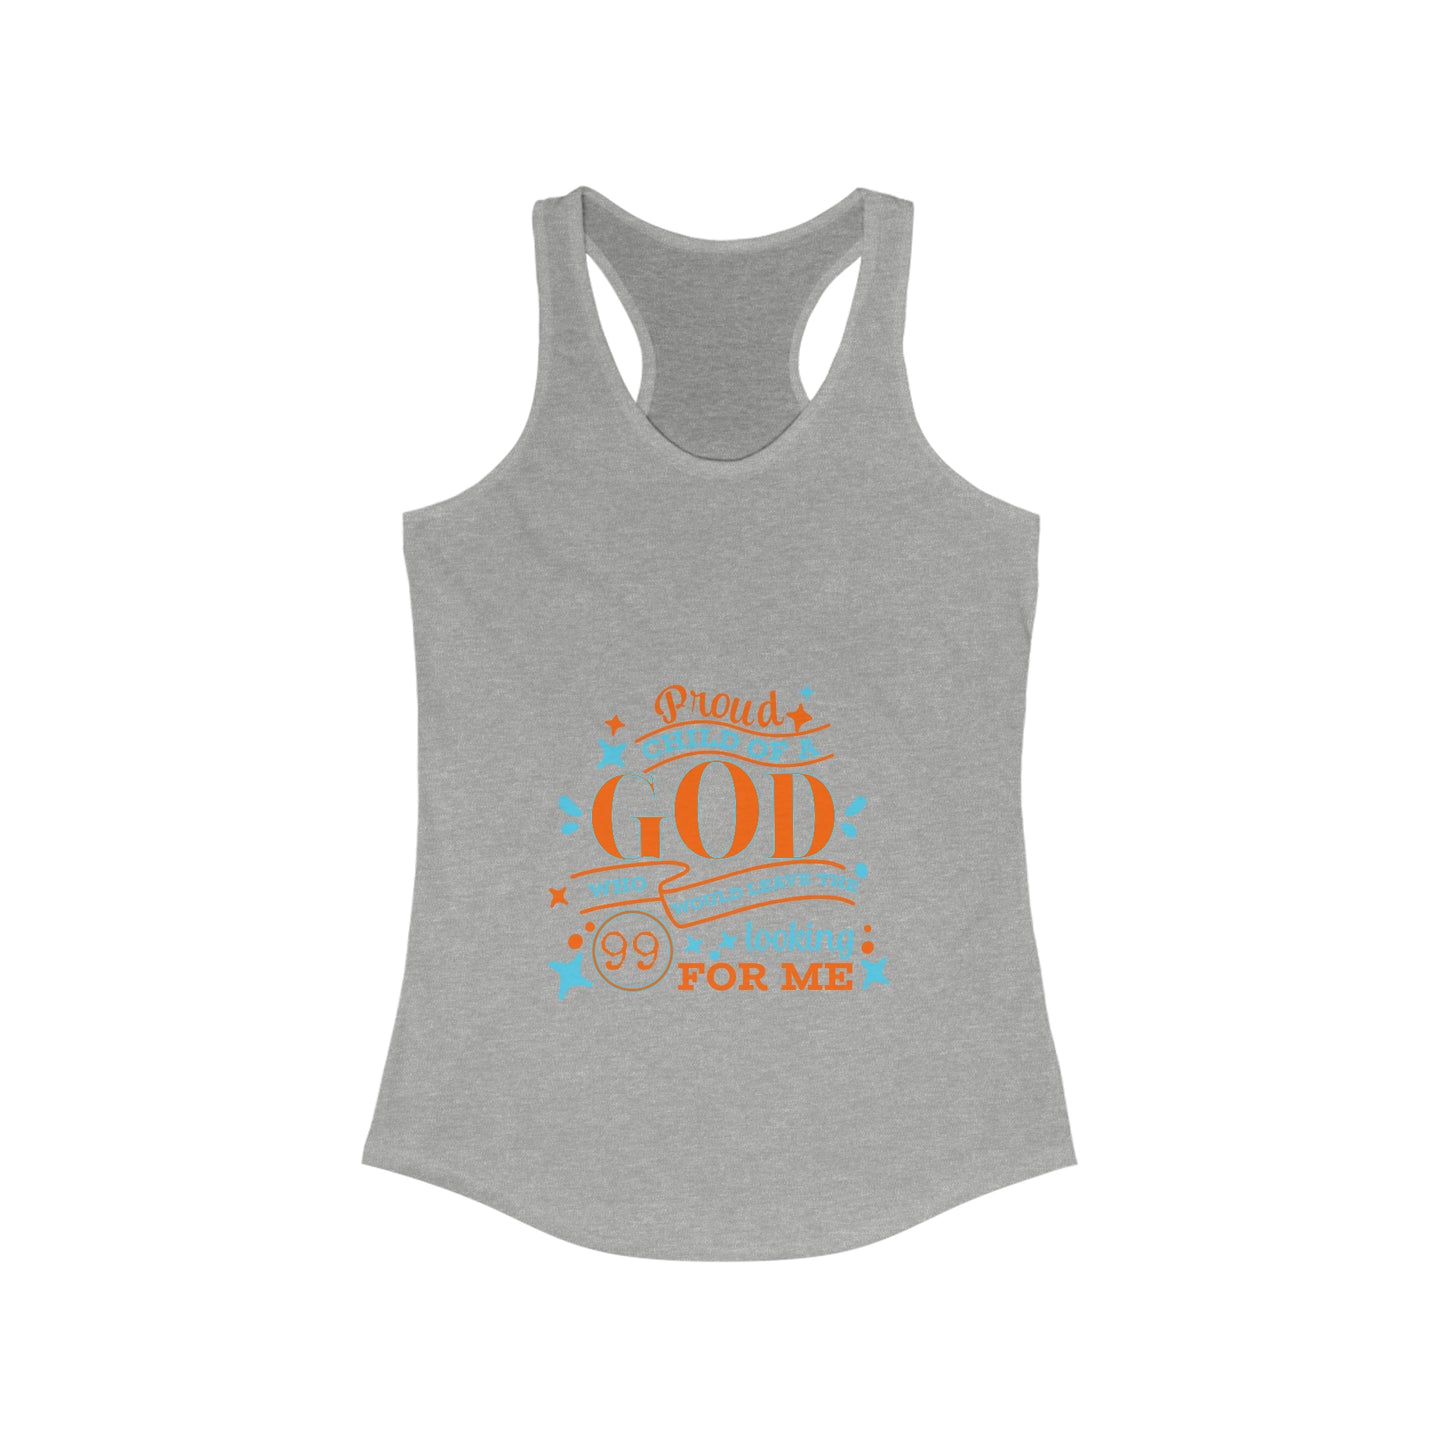 Proud Child Of A God Who Would Leave the 99 Looking For Me Slim Fit Tank-top